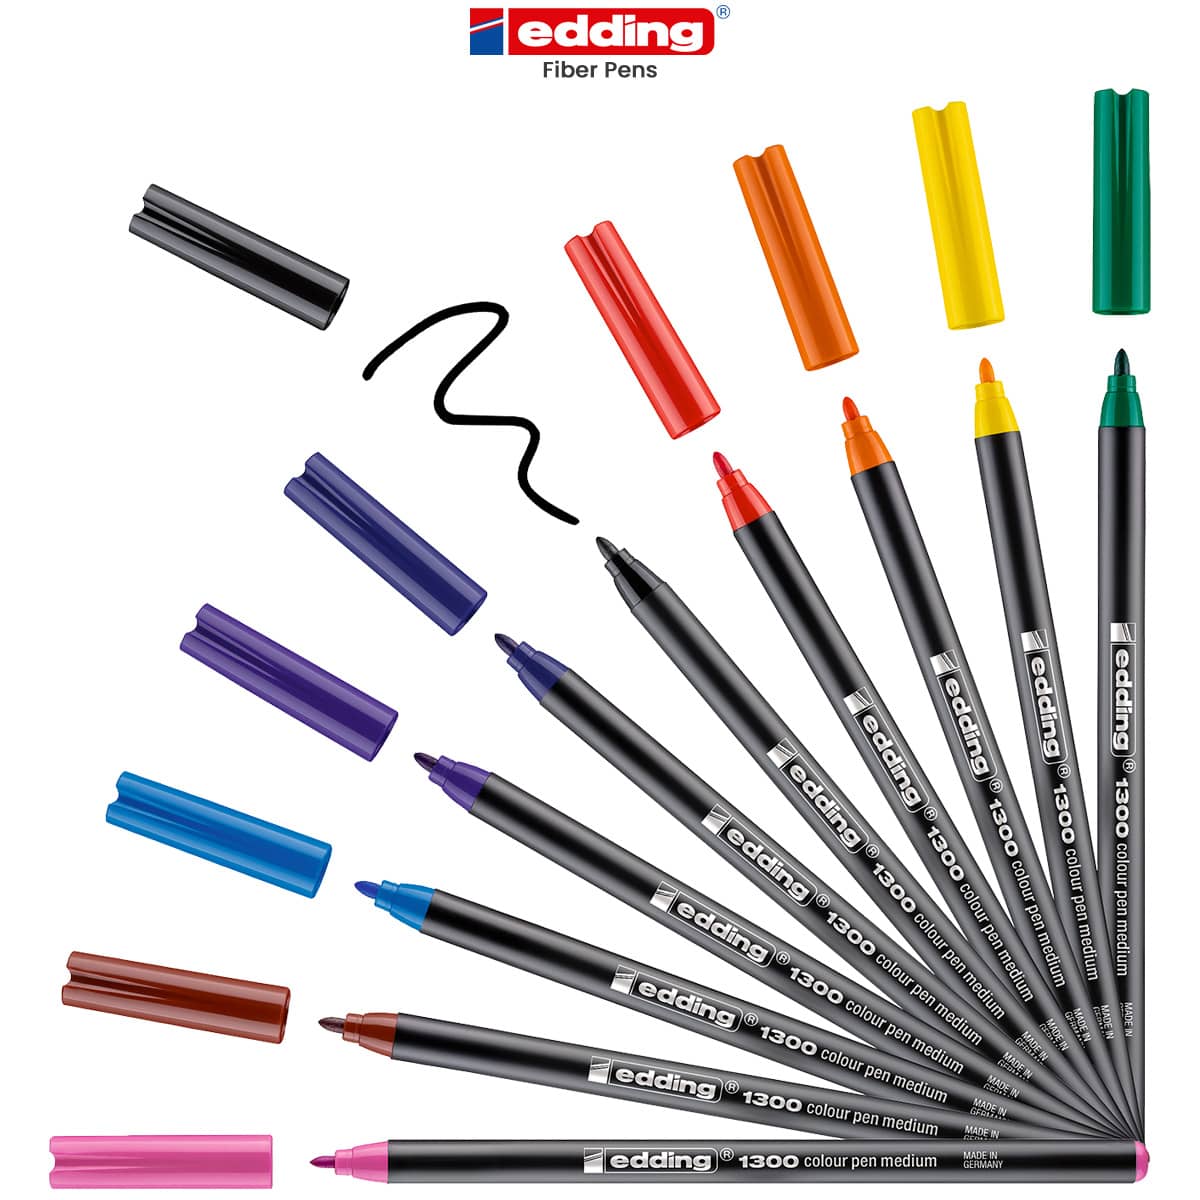 edding 1200 glitter pens - pastel colours - 4 fibre-tip pens with intensive  glitter effect - round nib 3 mm - for precise writing, sketching and